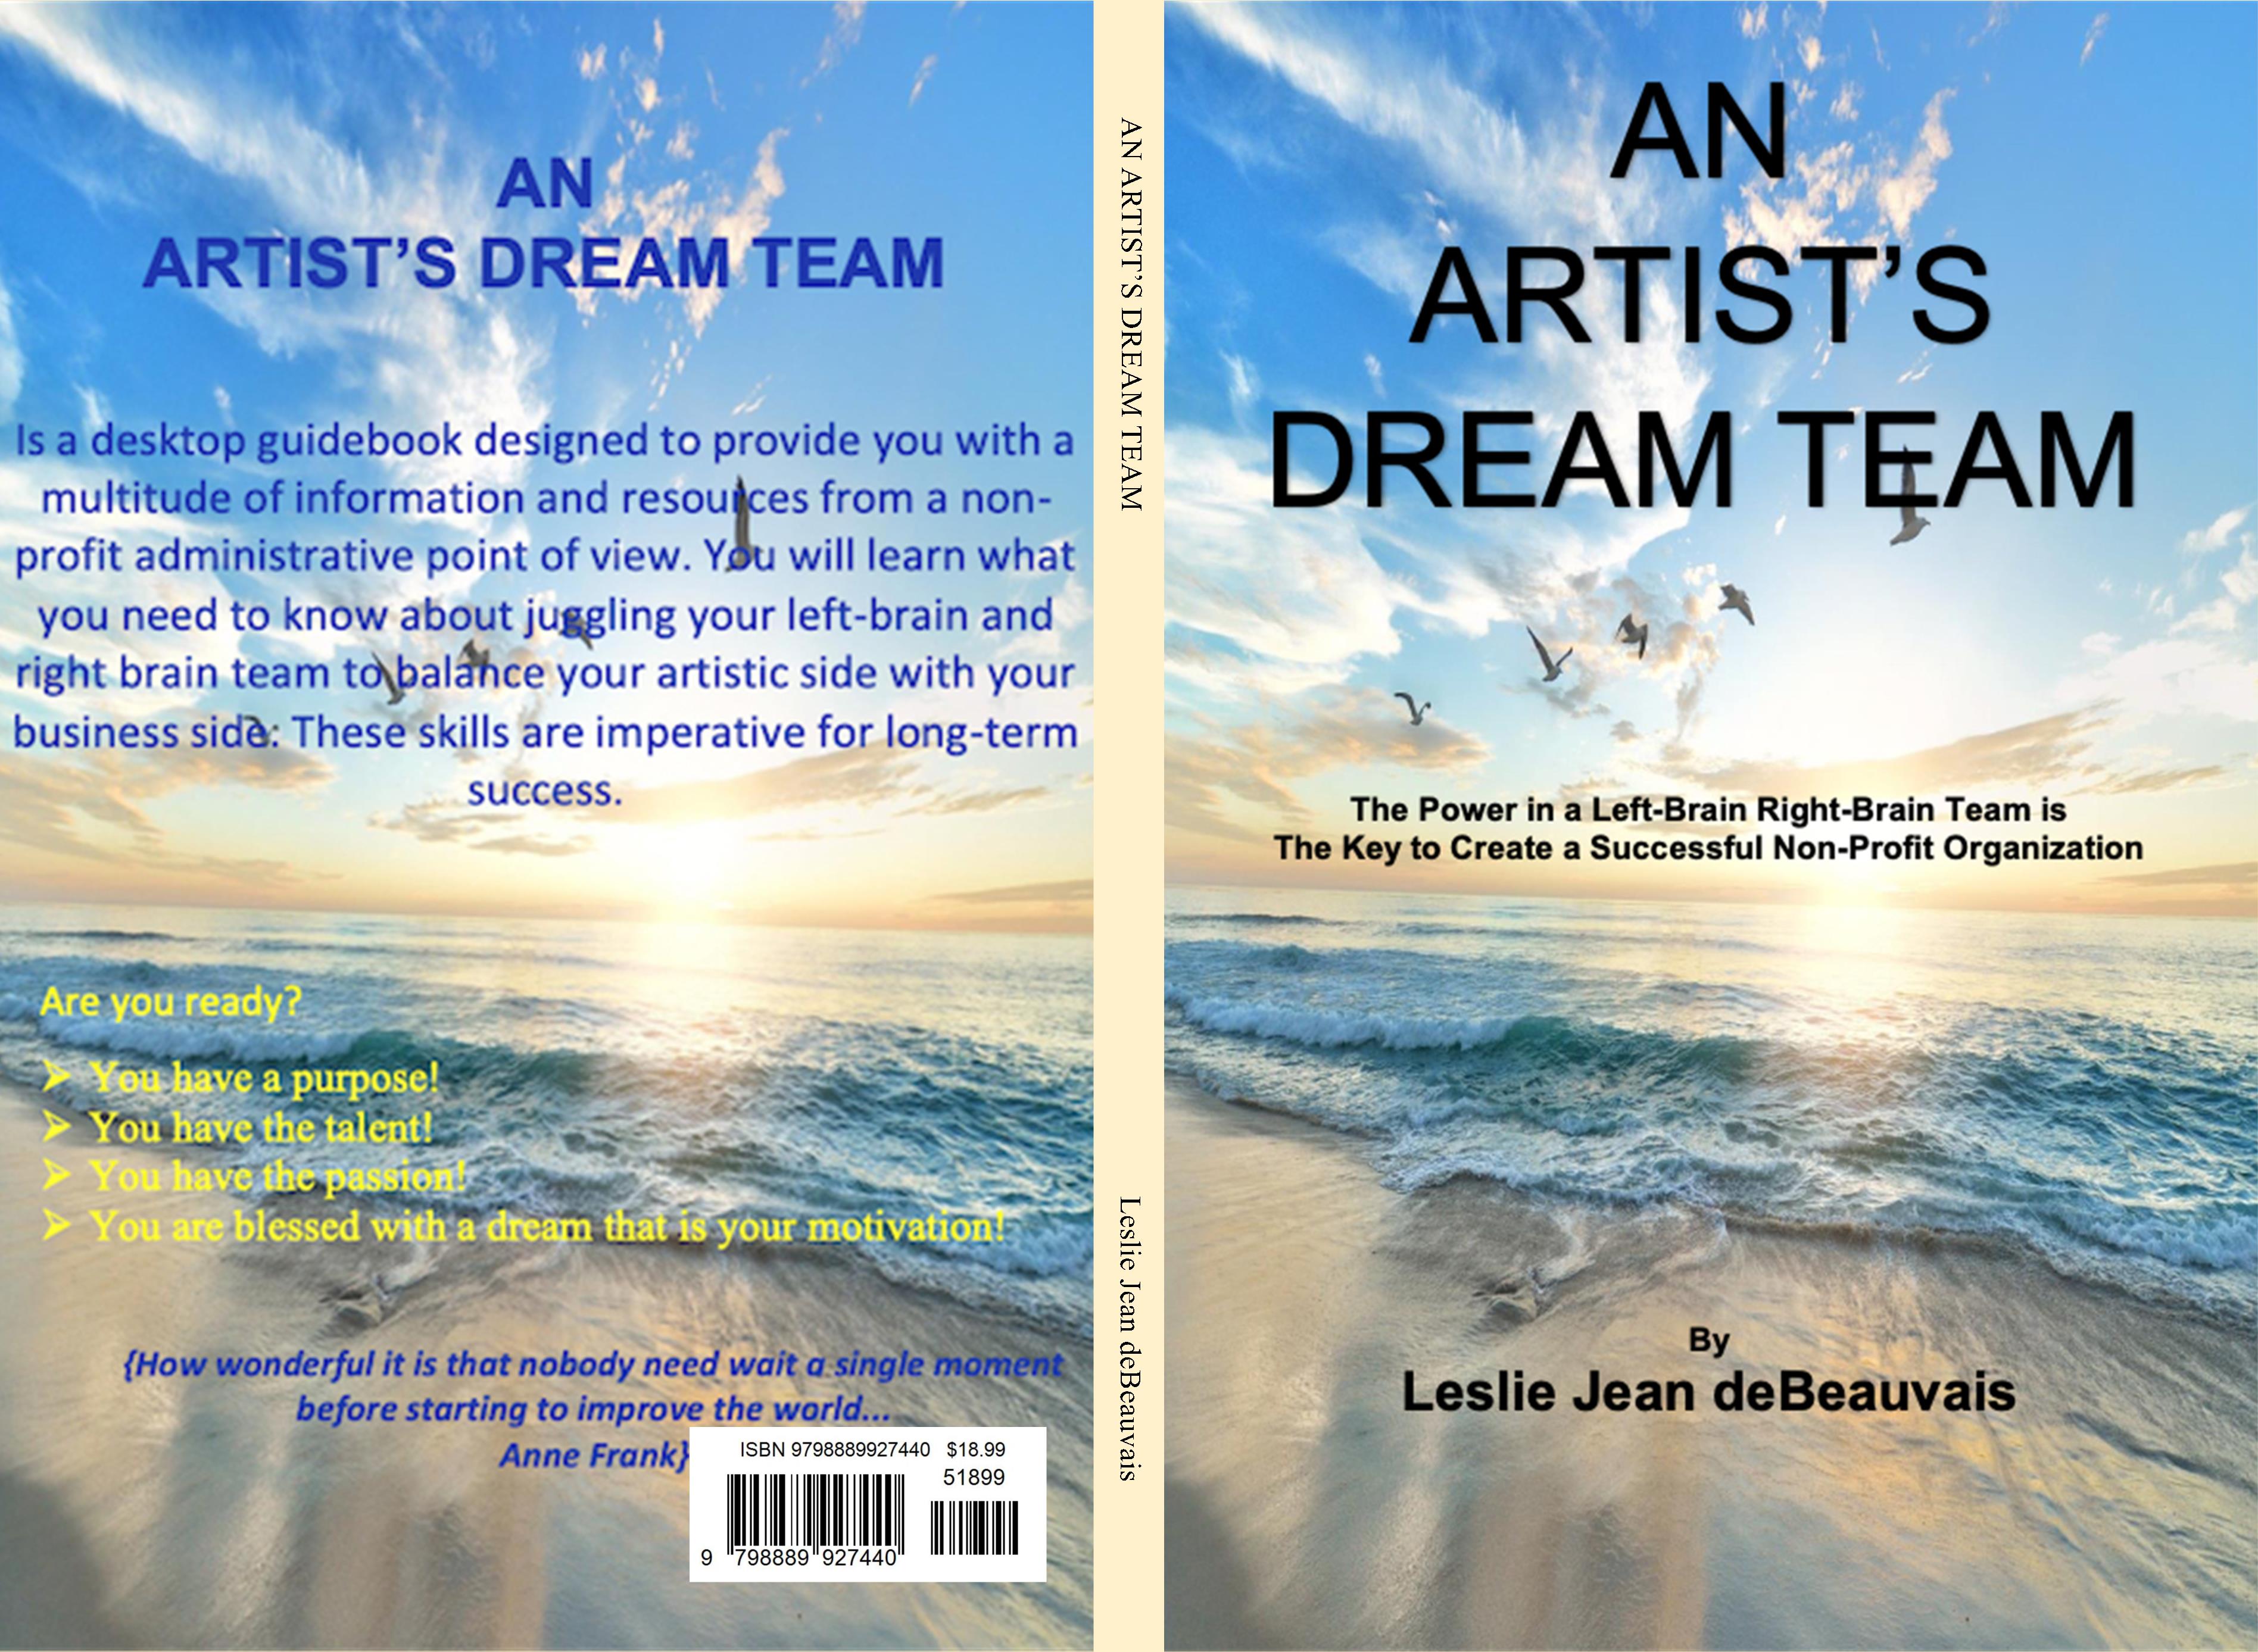 AN ARTIST’S DREAM TEAM The Power in a Left-Brain Right-Brain Team The Key to Create a Successful Non-Profit Organization cover image